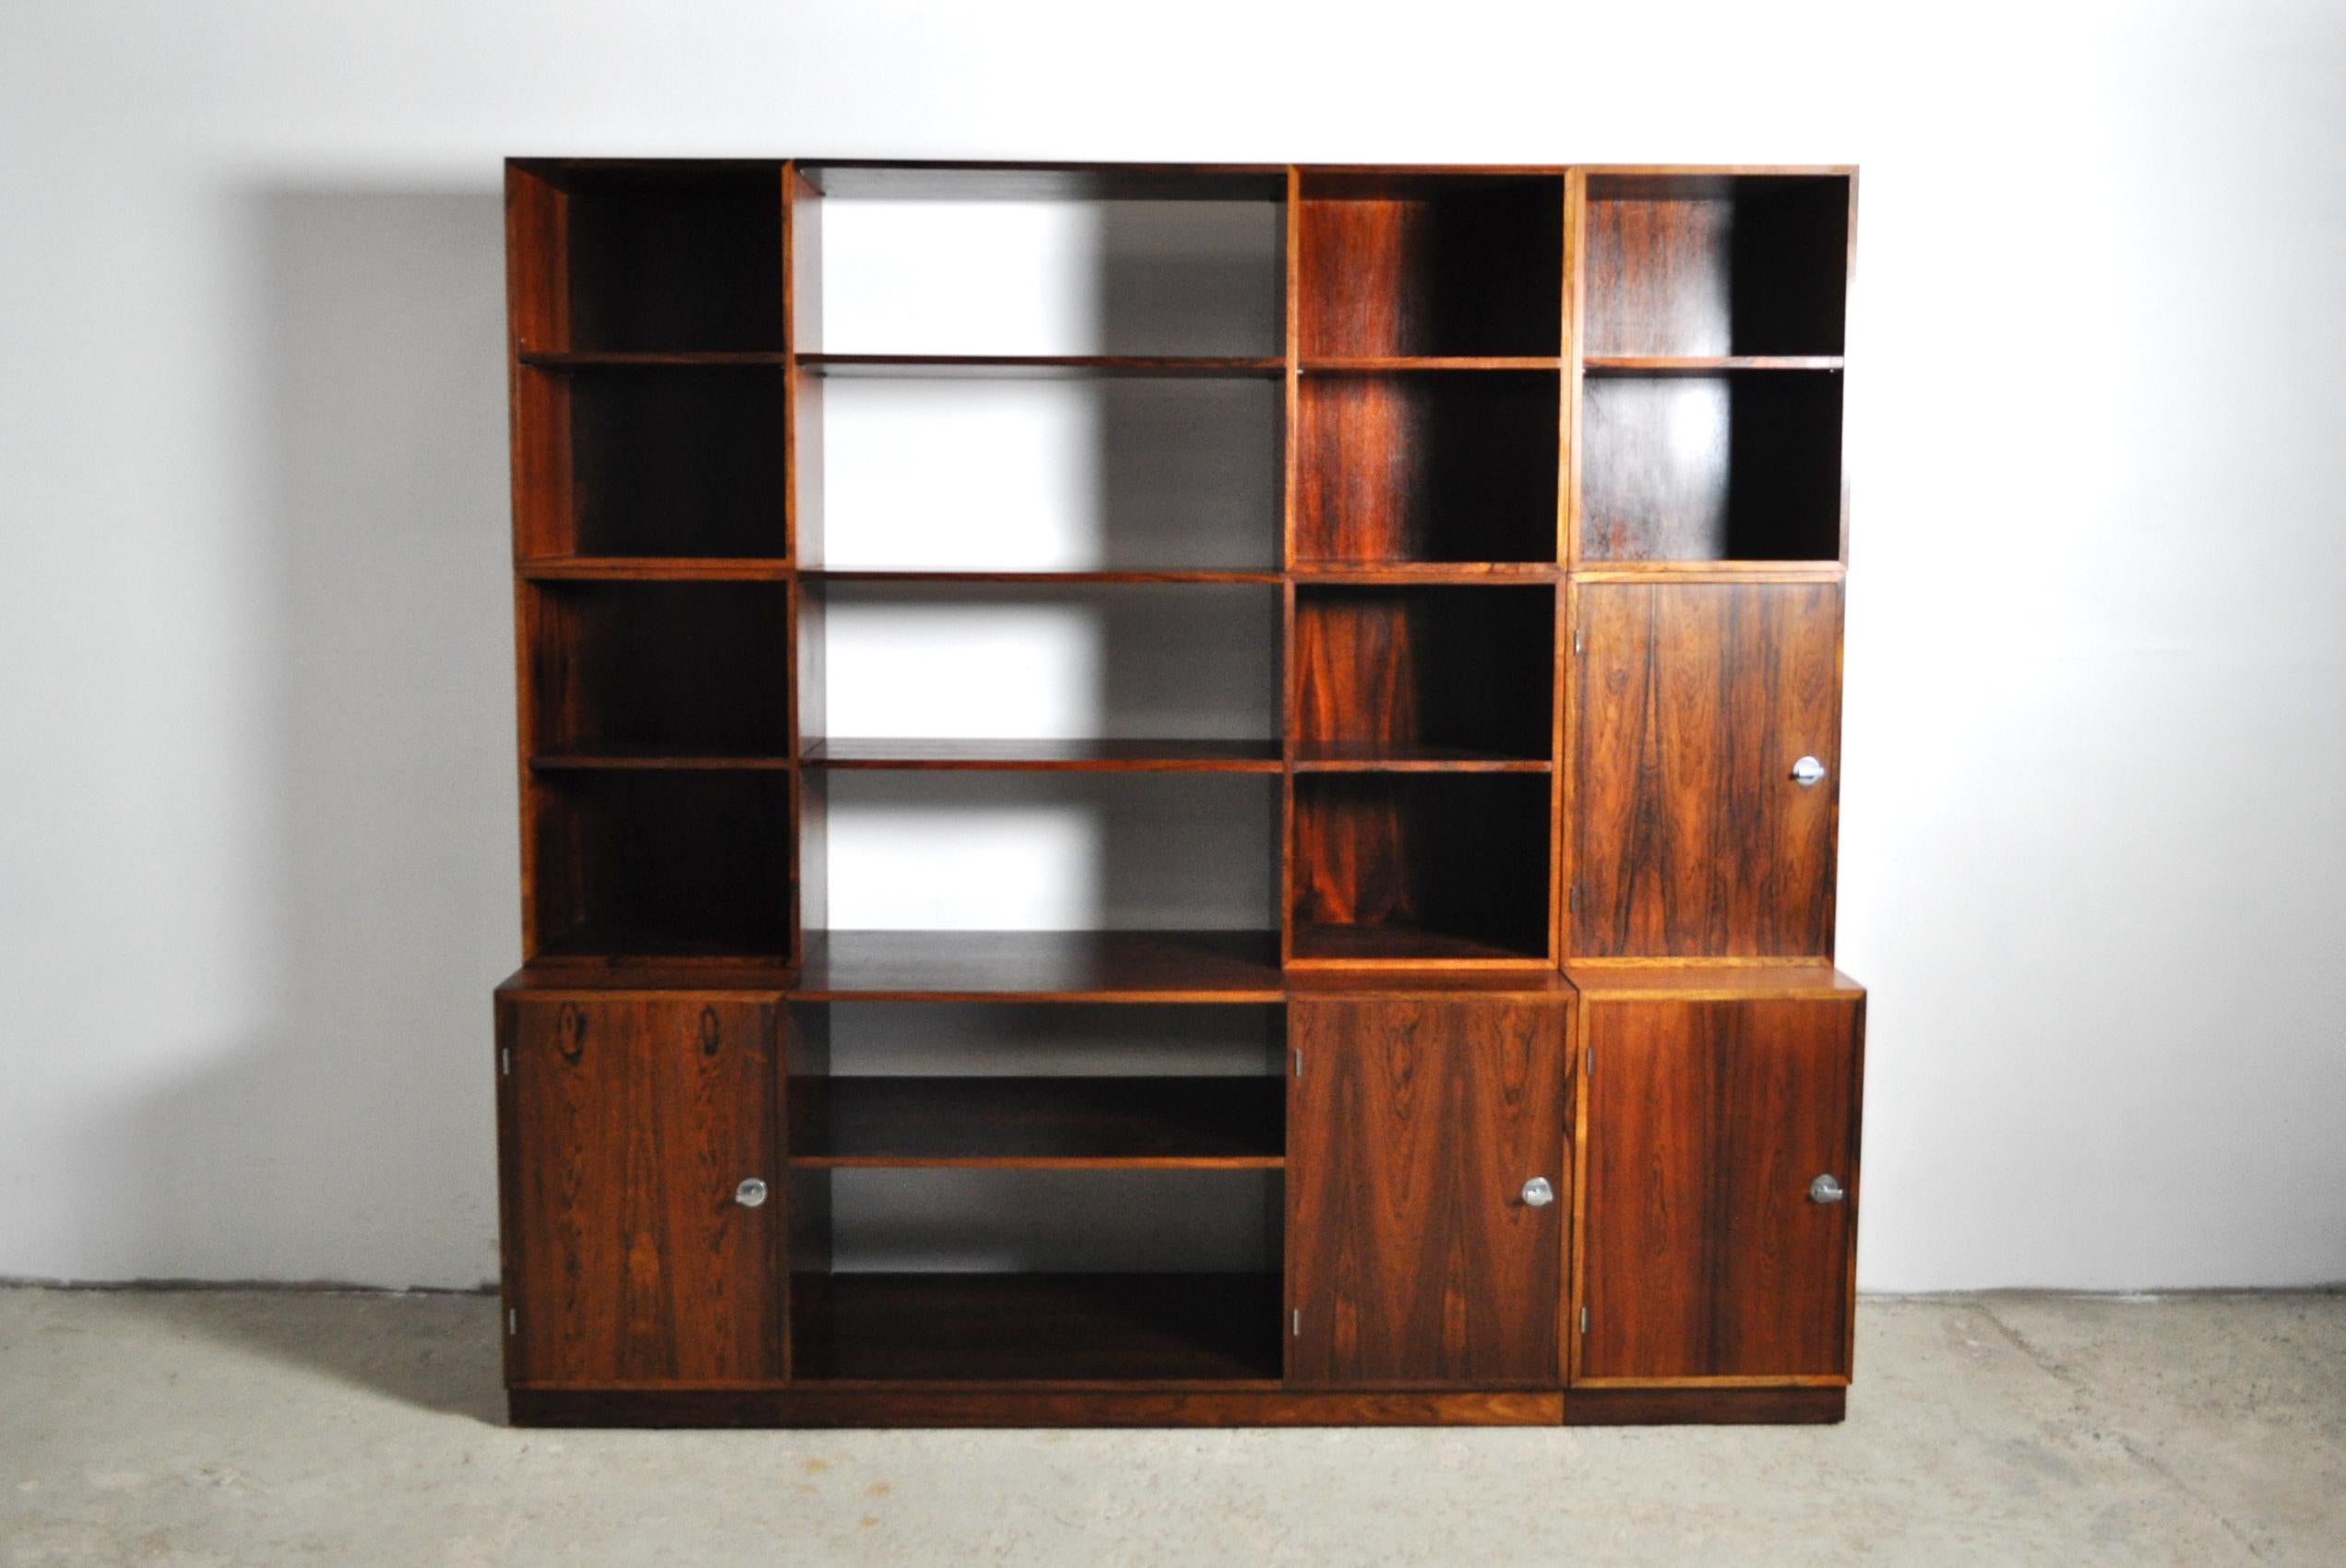 Finn Juhl Modular rosewood storage system model Cresco designed 1966 for France & Søn. The wall unit comprises four cabinets, five bookcases, multiple shelves, a triple and a single plinth. The cabinets feature signature aluminum bowtie pulls. 
It